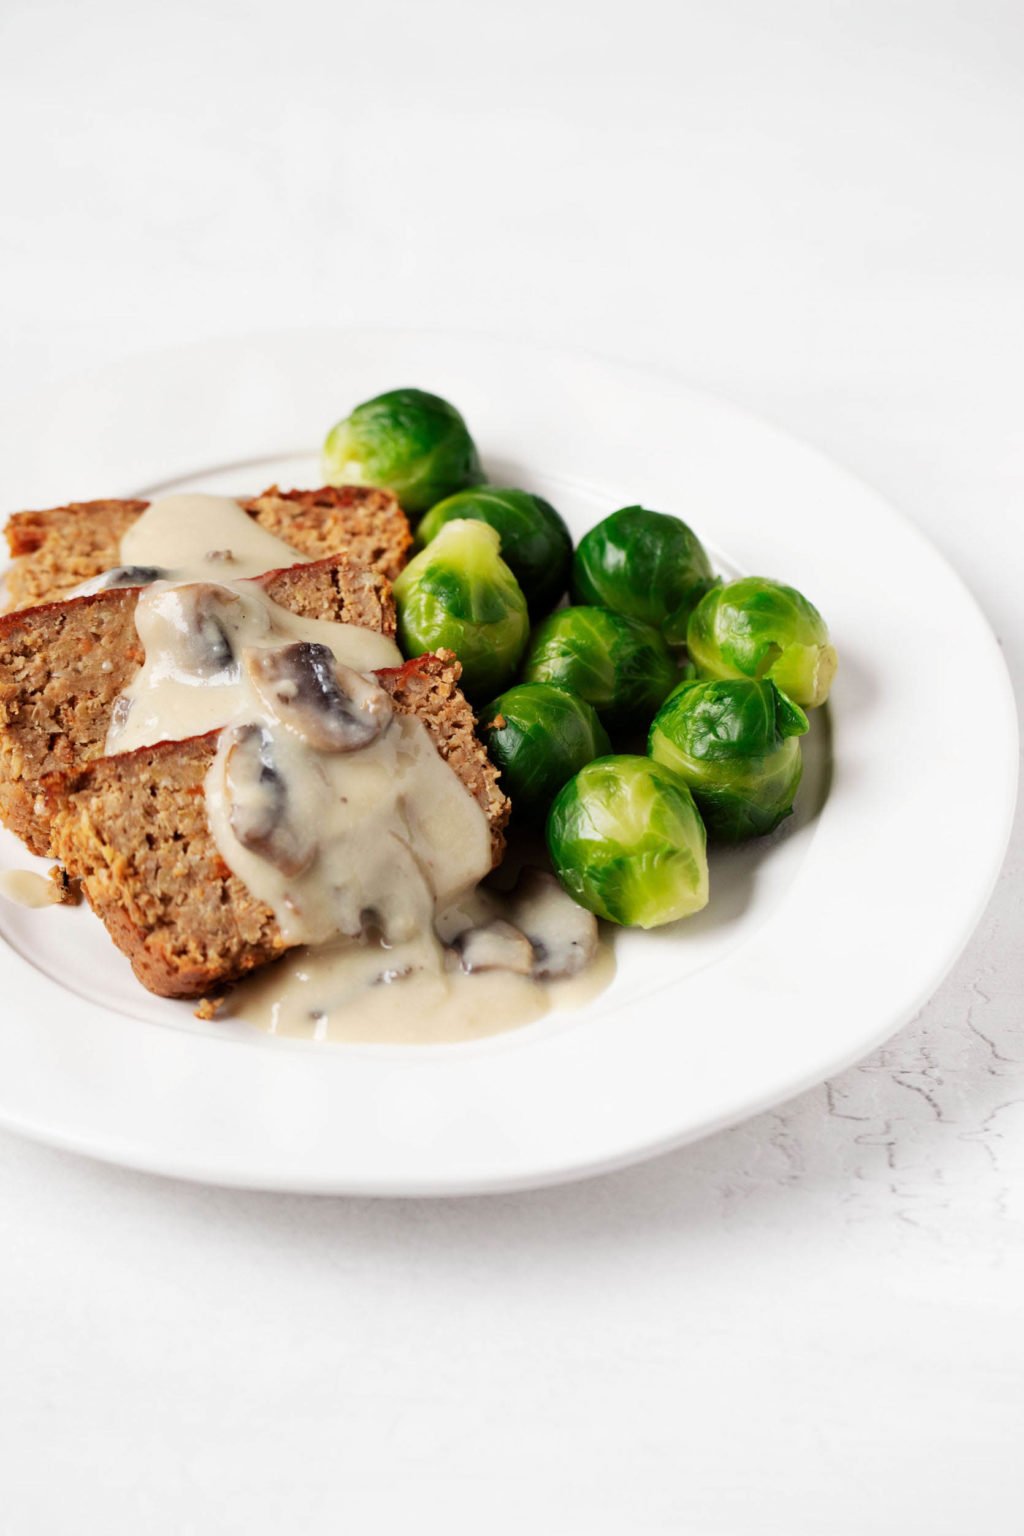 A vegan red lentil chickpea loaf has been topped with a creamy mushroom gravy. It's served on a white plate with Brussels sprouts.